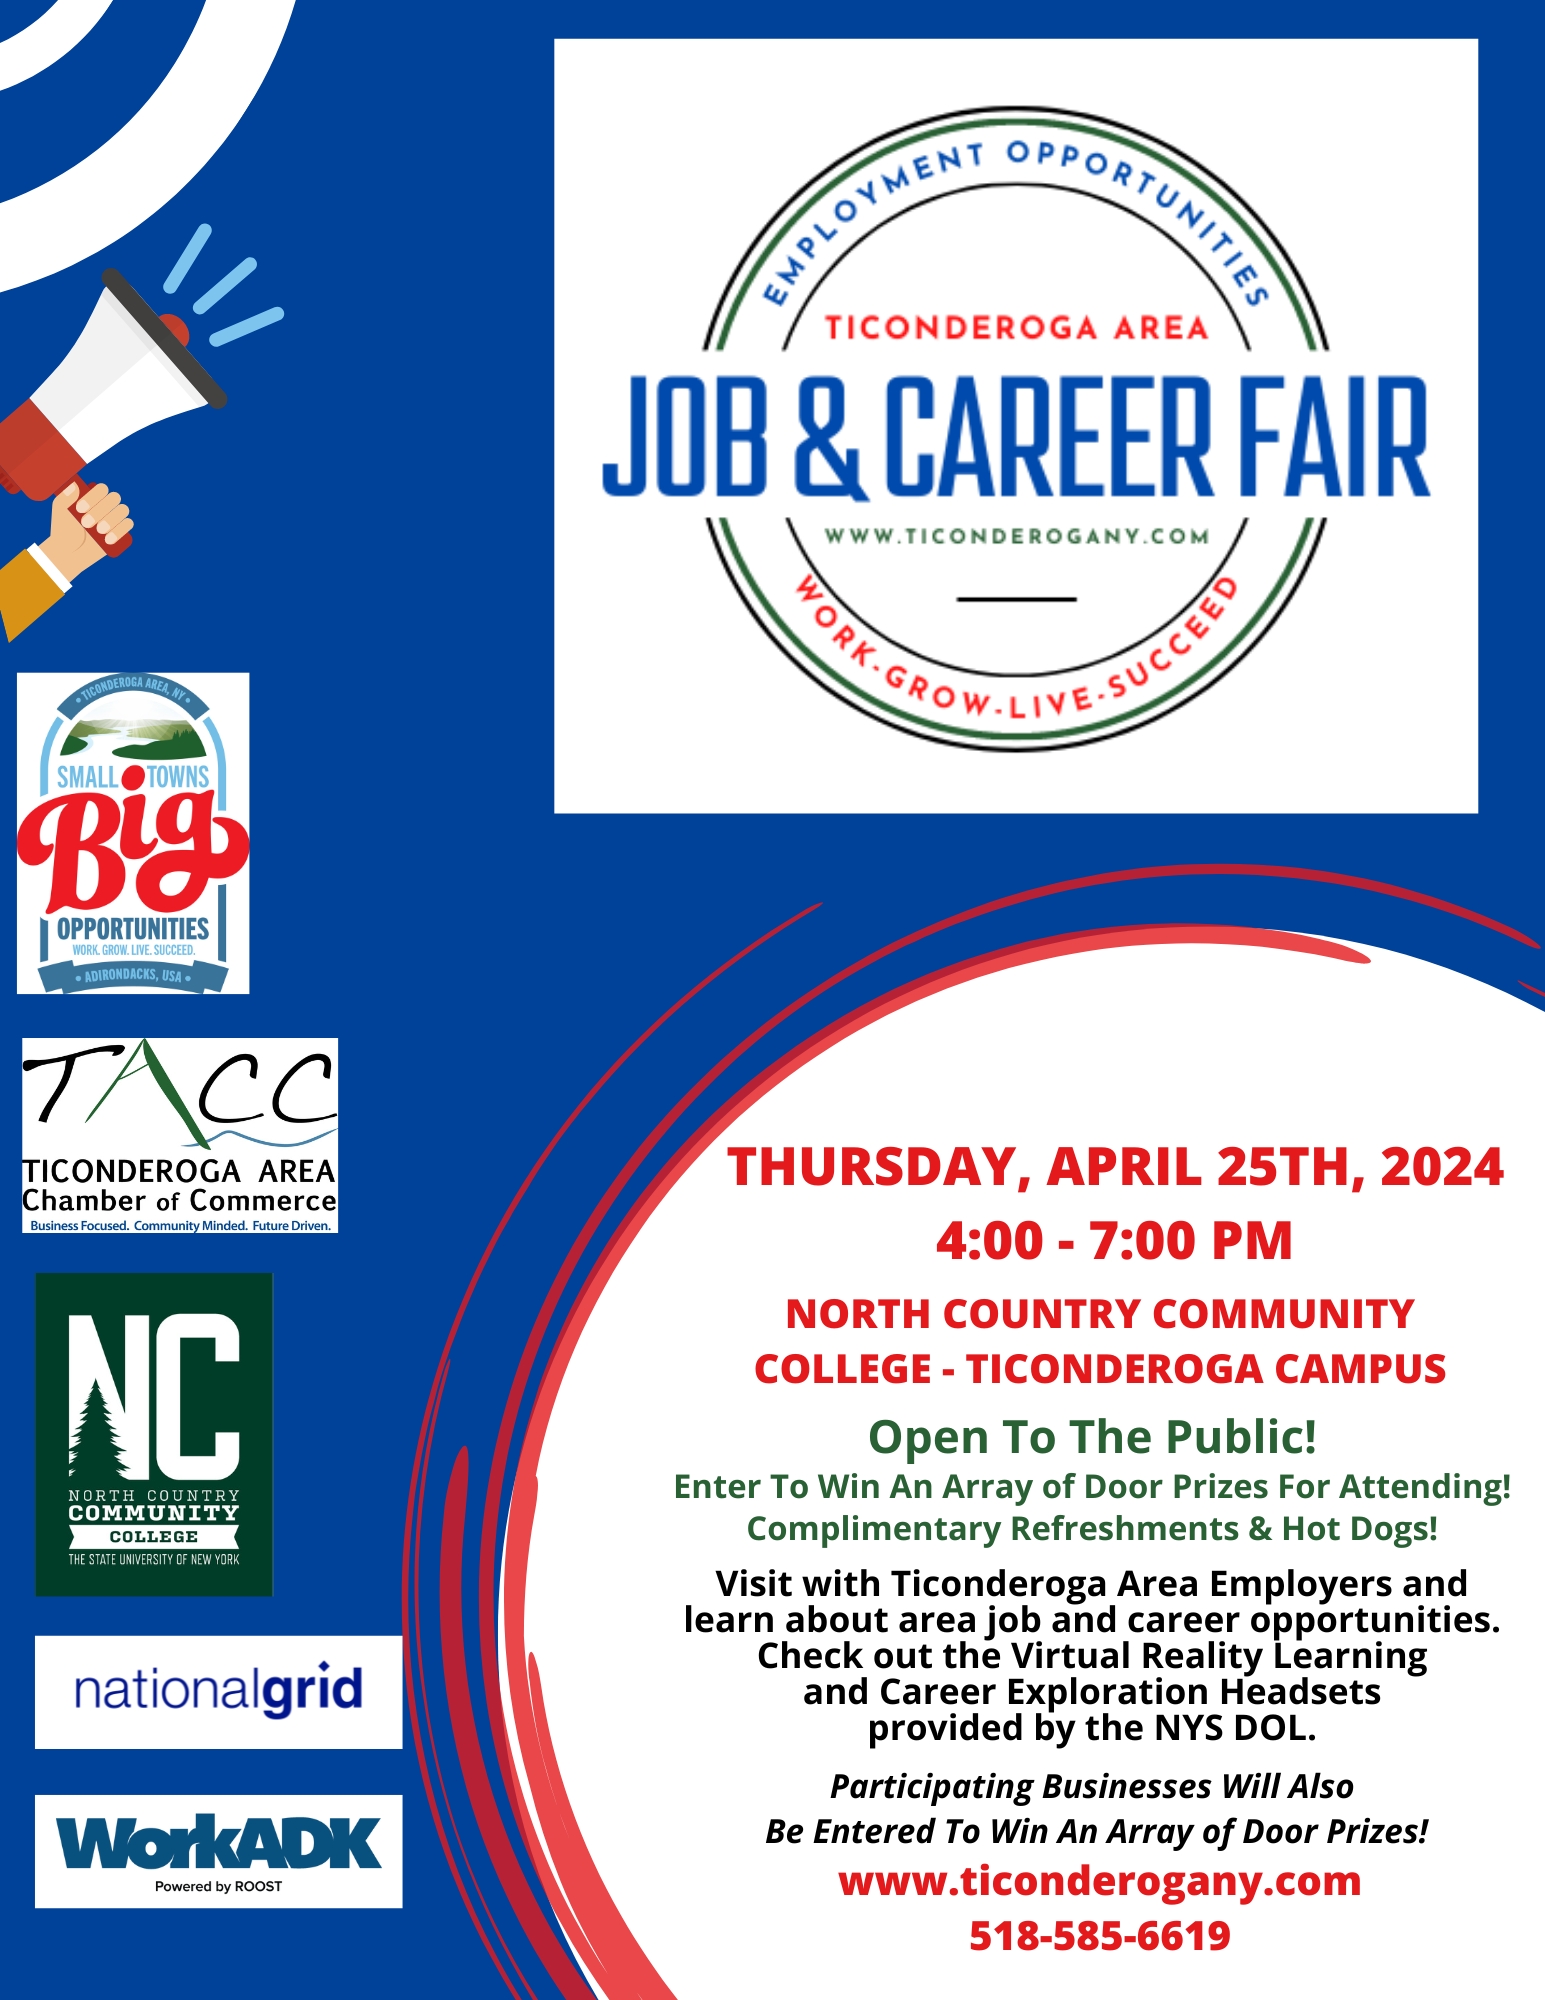 A flyer providing details about an upcoming Job and Career Fair at the college's Ticonderoga campus